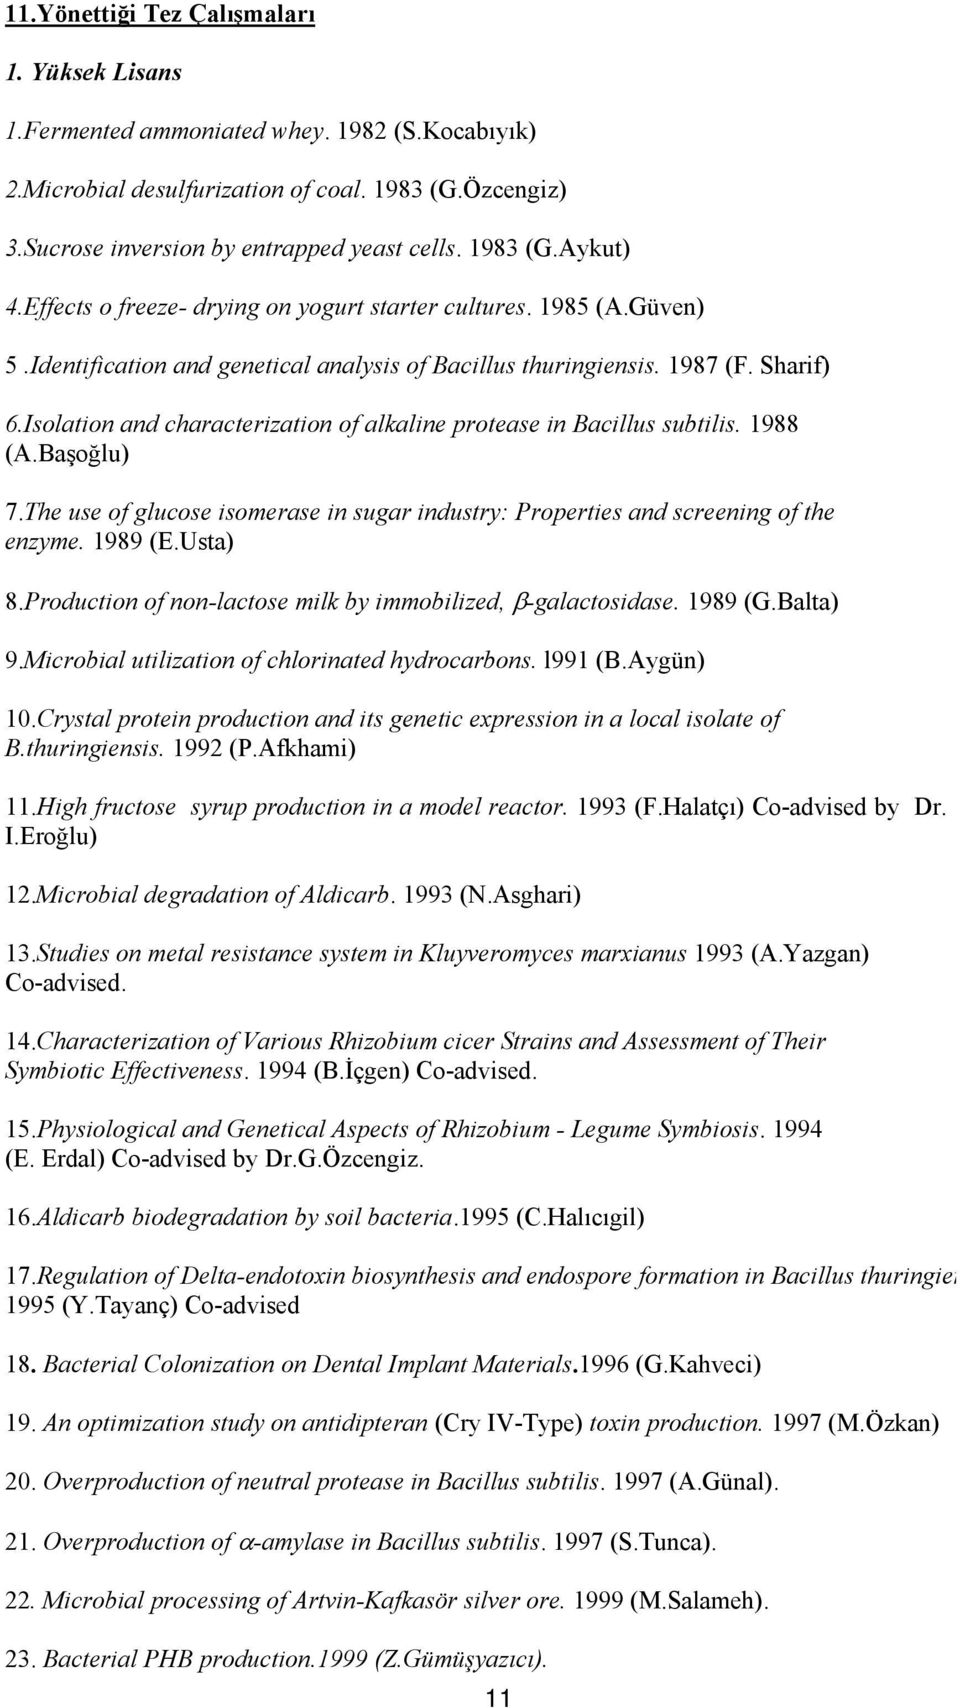 Isolation and characterization of alkaline protease in Bacillus subtilis. 1988 (A.Başoğlu) 7.The use of glucose isomerase in sugar industry: Properties and screening of the enzyme. 1989 (E.Usta) 8.